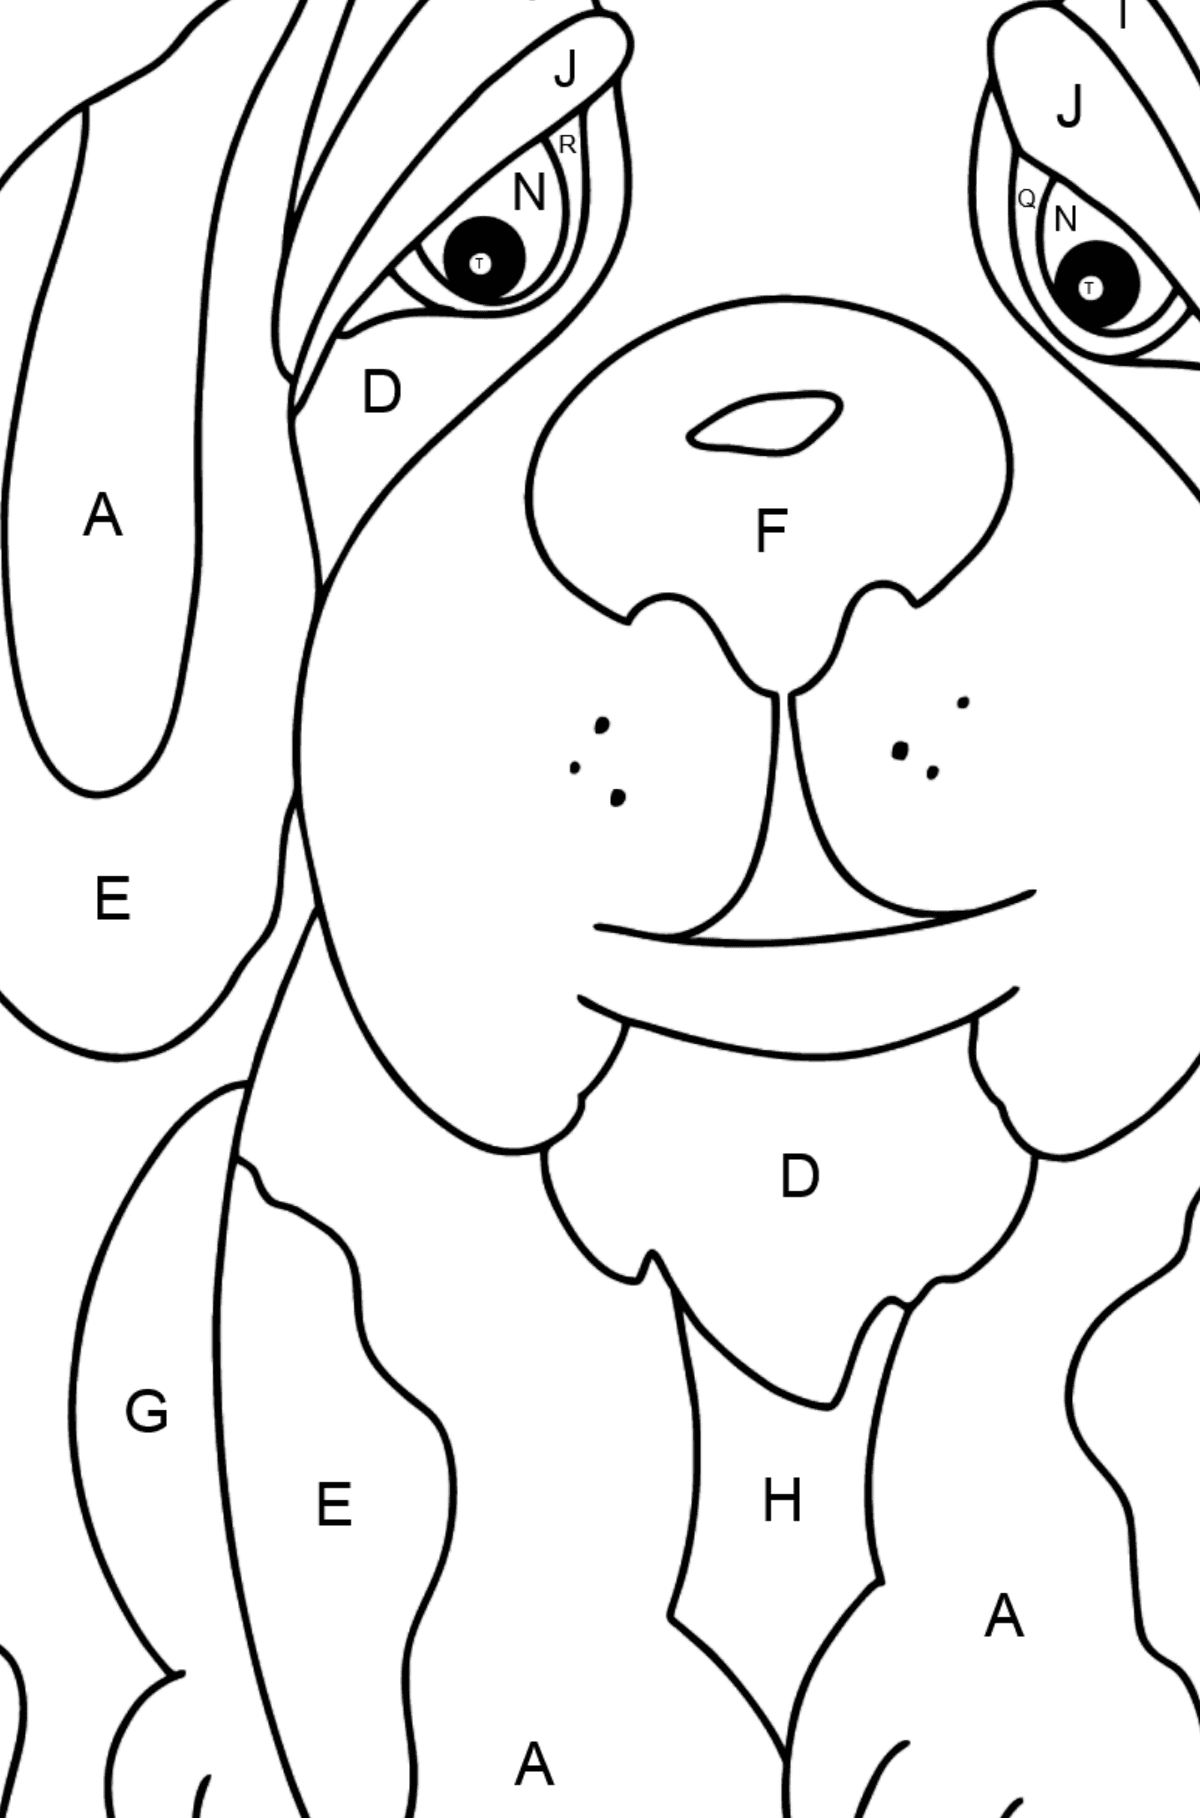 Coloring Page - A Dog is Watching a Butterfly - Coloring by Letters for Kids